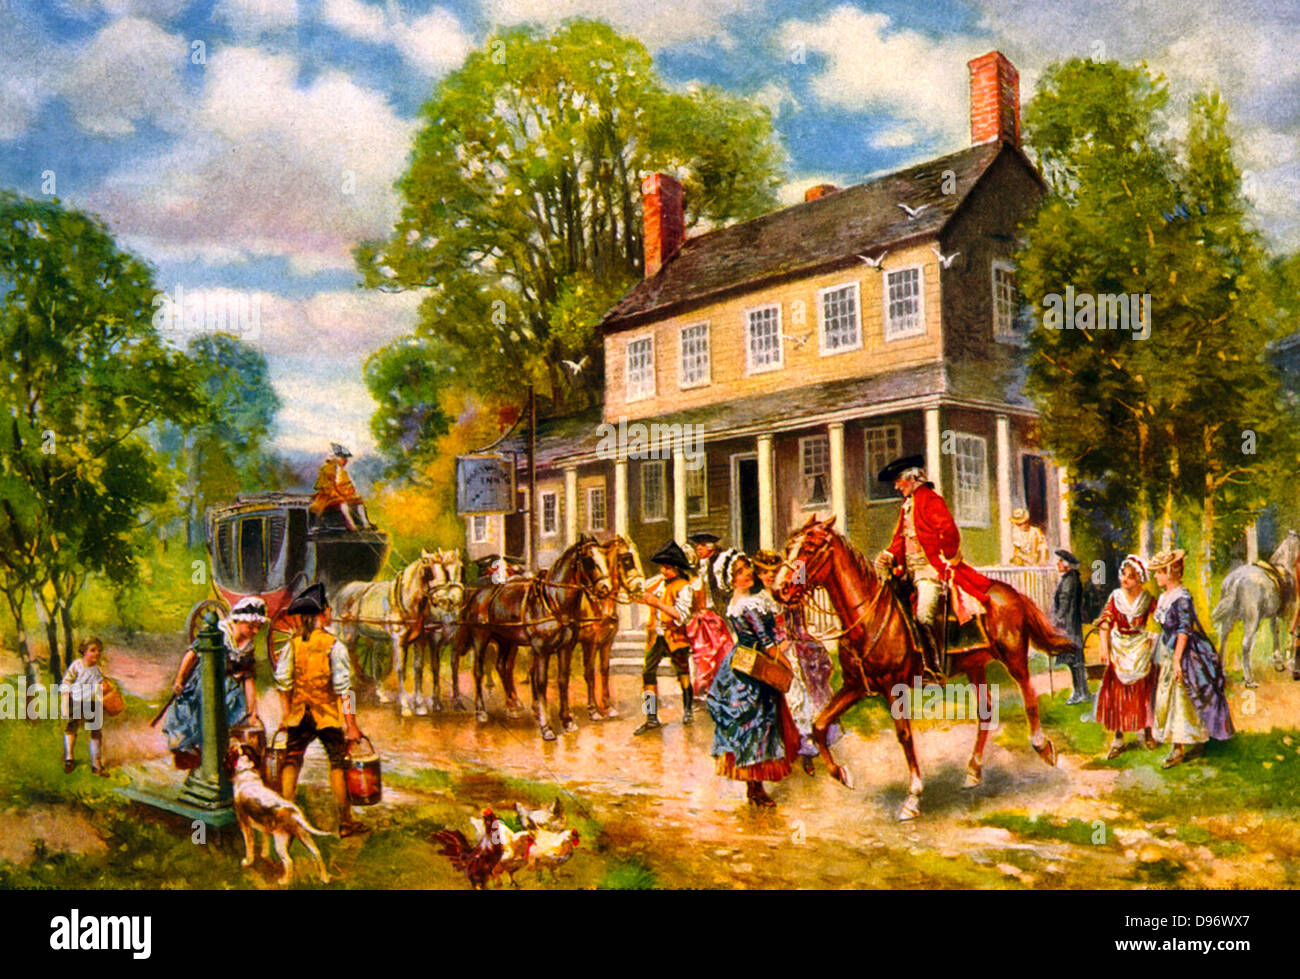 The Concord stage - Stagecoach in front of inn and a British soldier on horseback. Stock Photo